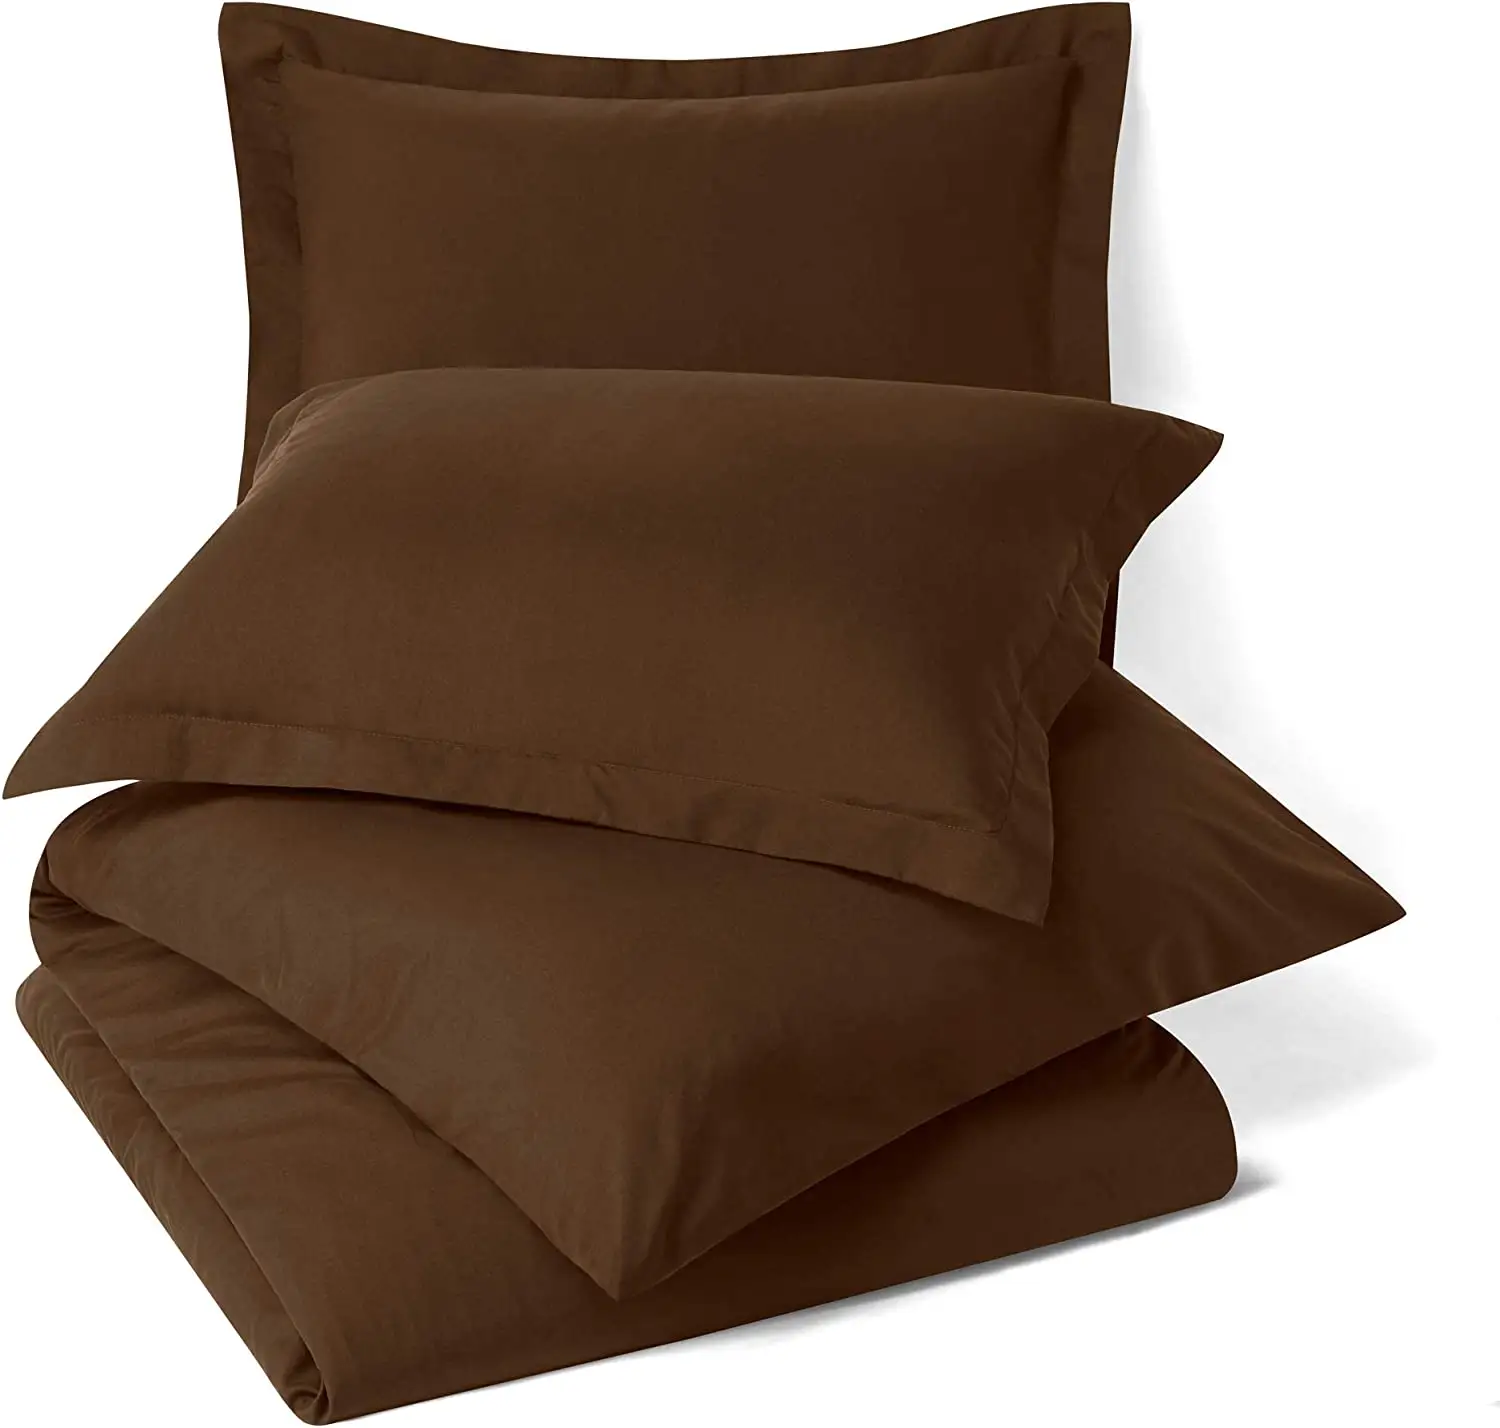 Duvet Cover Queen Size Brown color - Soft Queen Duvet Cover Set, 3 Piece Double Brushed Duvet Covers with Button Closure